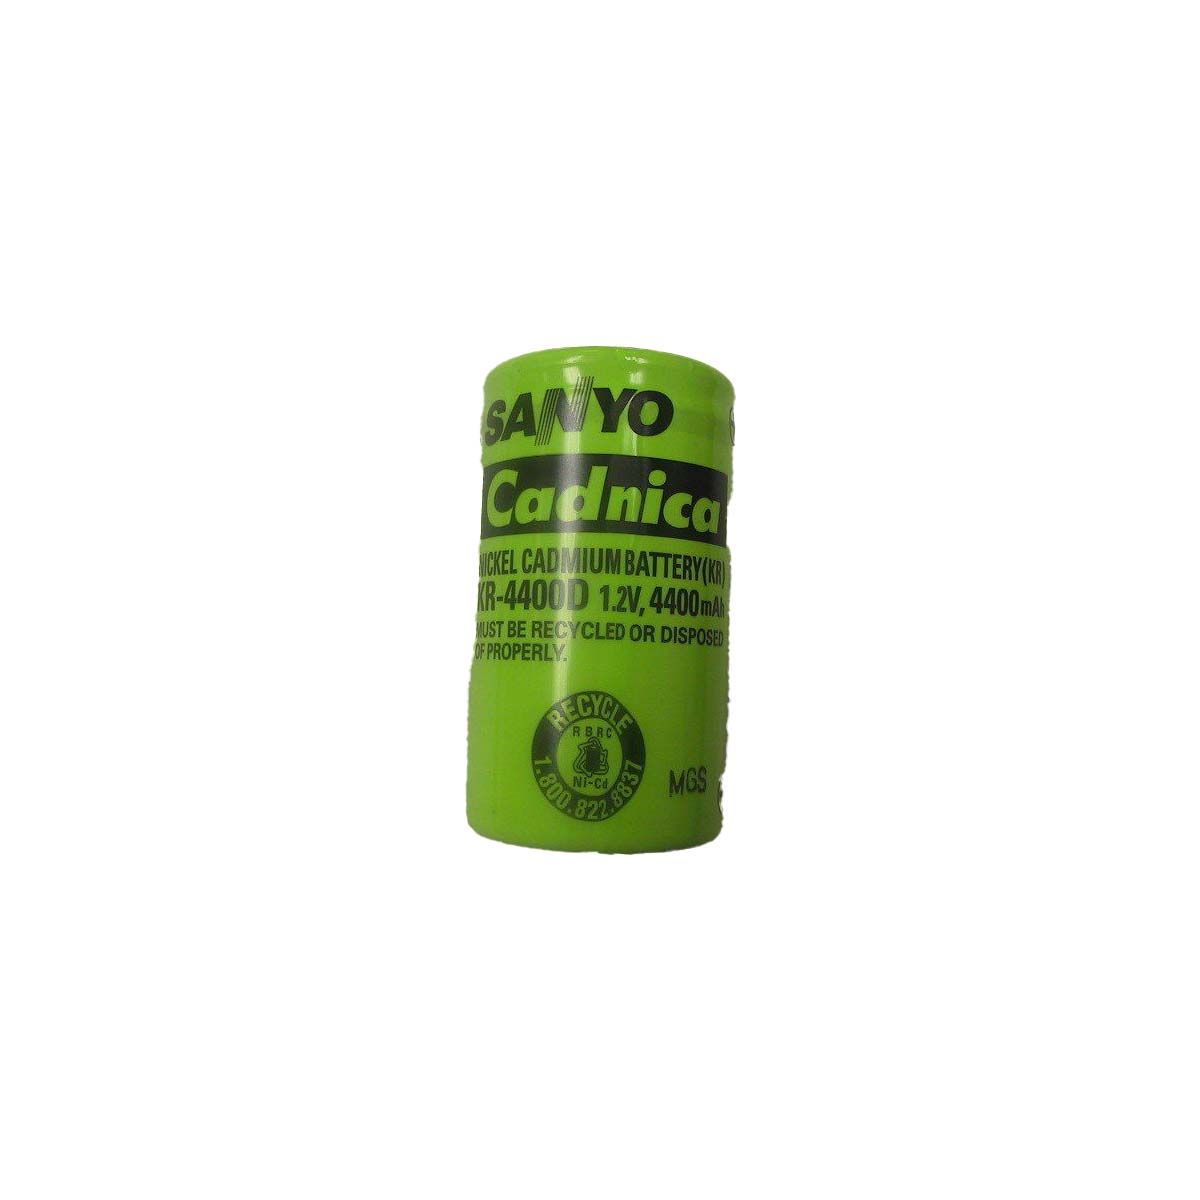 New In stock for sale, SANYO Battery 4PCS